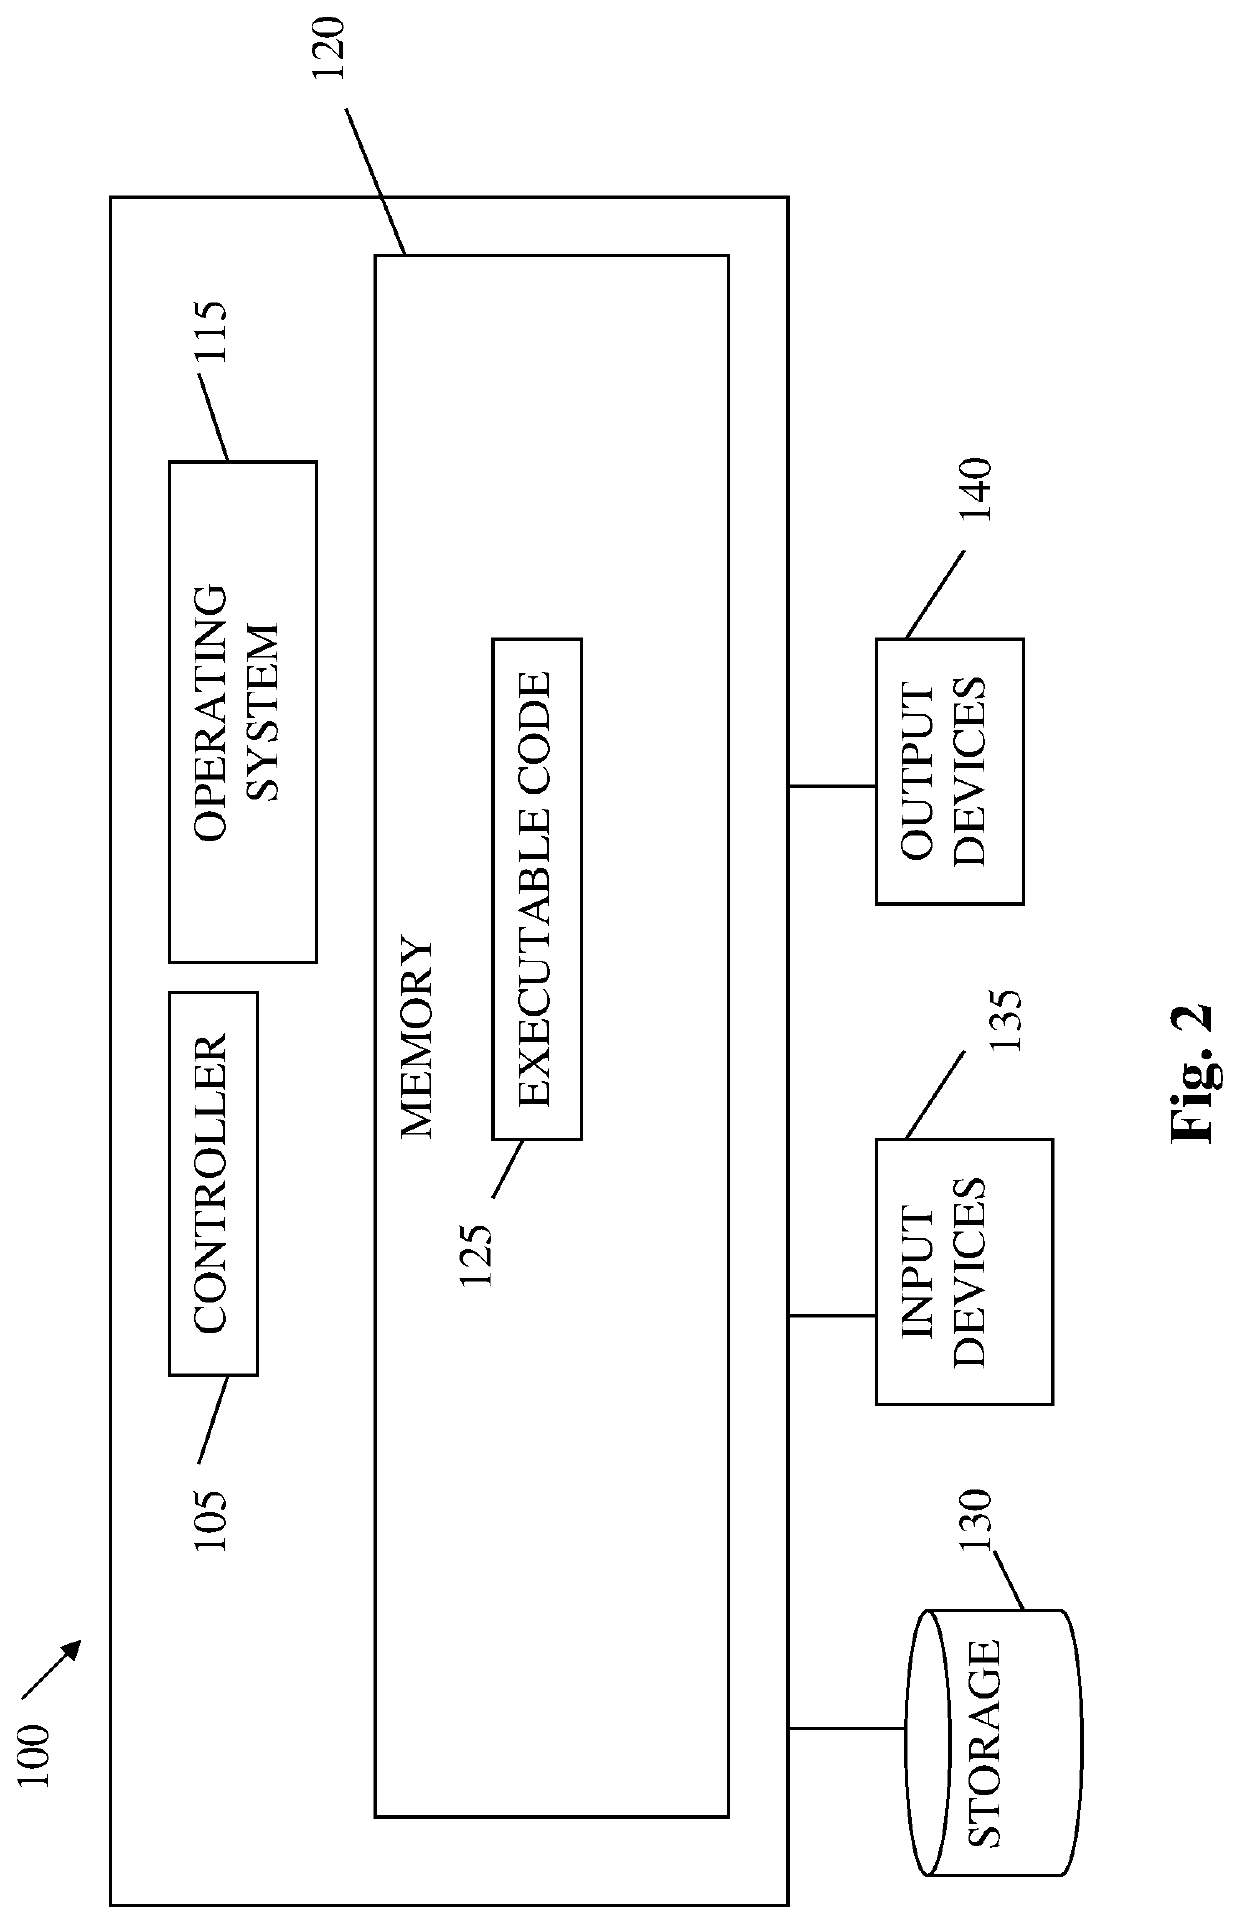 System and method for frustration detection